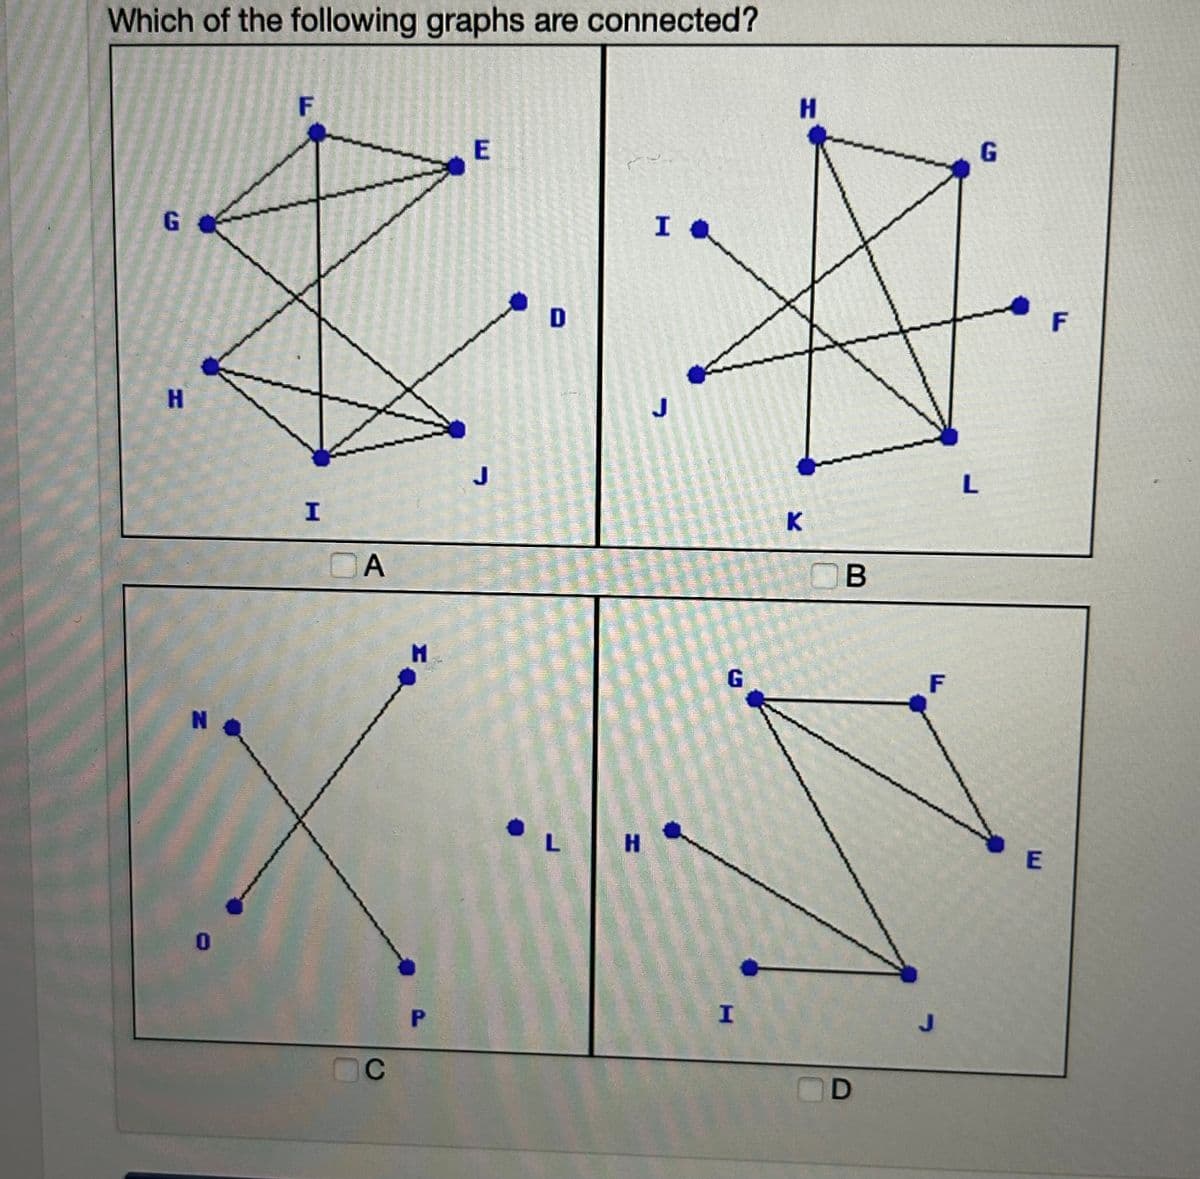 Which of the following graphs are connected?
G
H
N
0
F
I
DA
C
M
P
E
D
L
H
Id
J
G
I
H
K
B
D
F
J
G
L
E
F